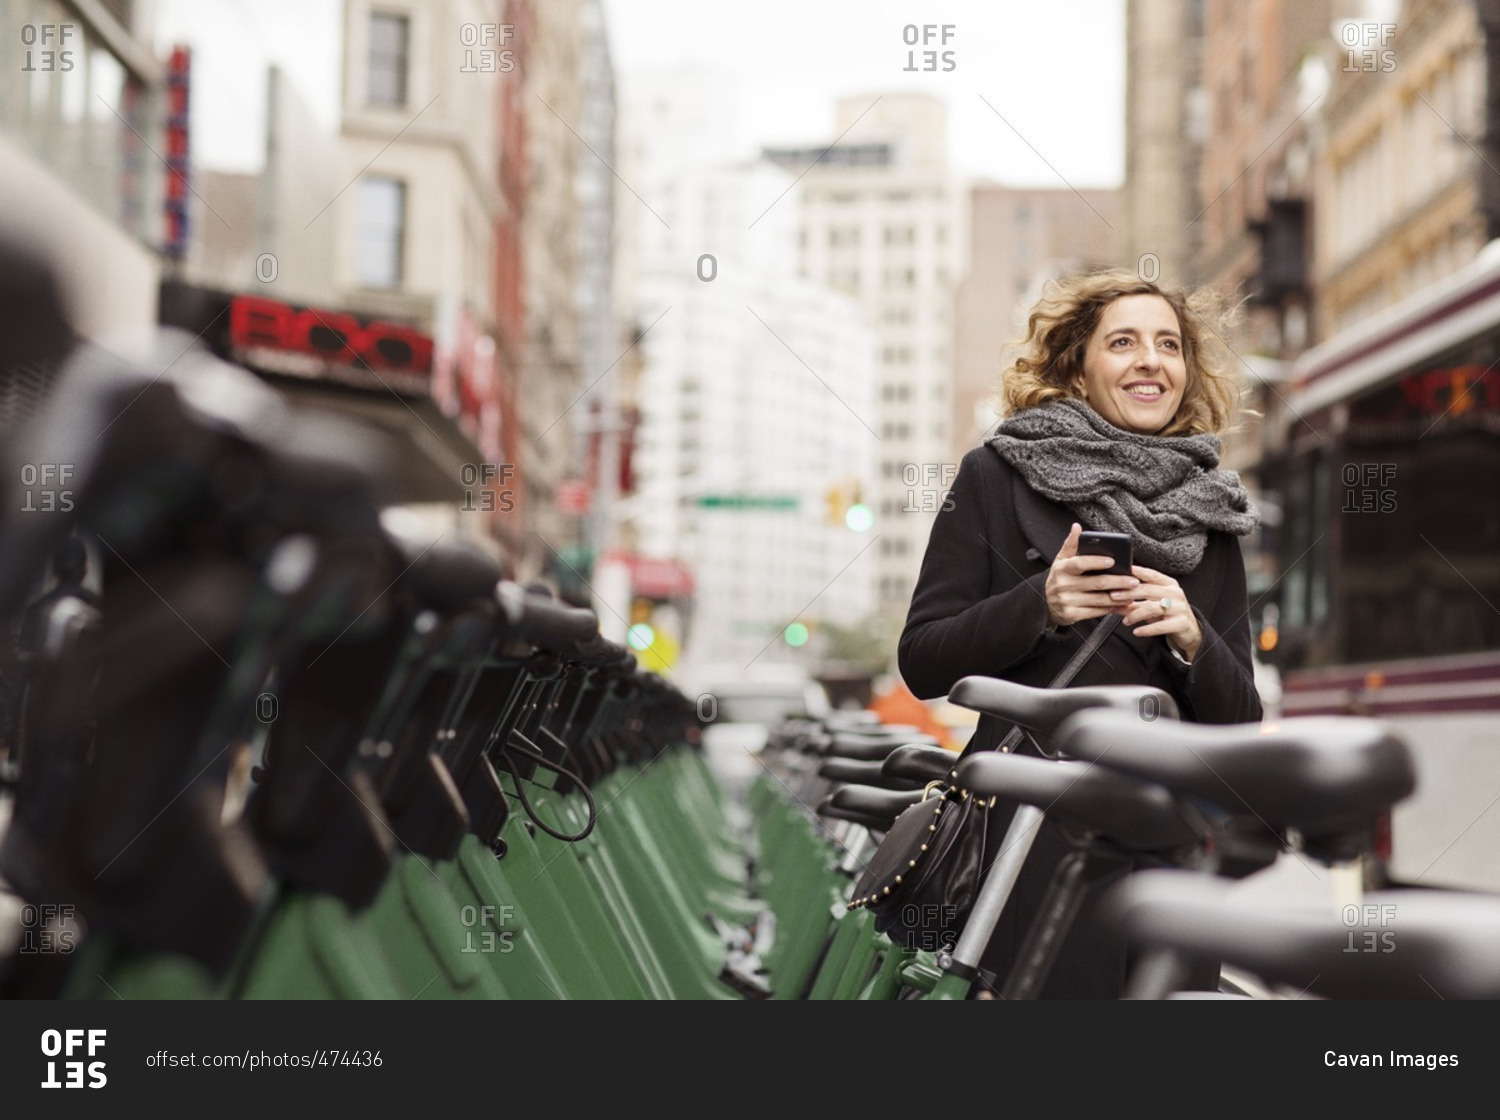 Woman holding mobile phone standing by bicycle rack in city